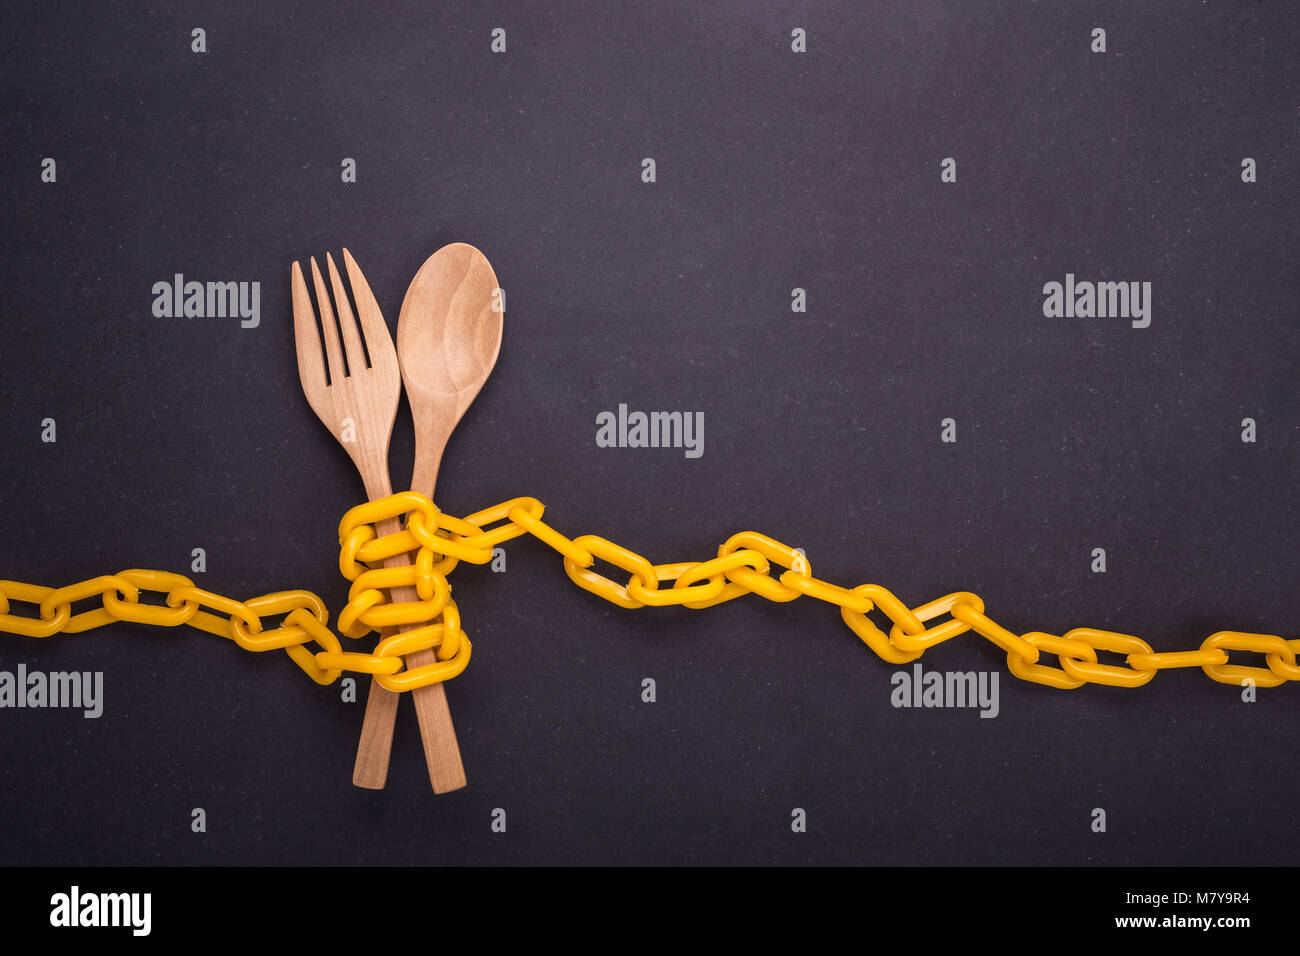 Yellow chain locked around the wooden spoon and fork on black stone board. Stop eating, eating control or diet concept. Top view Stock Photo